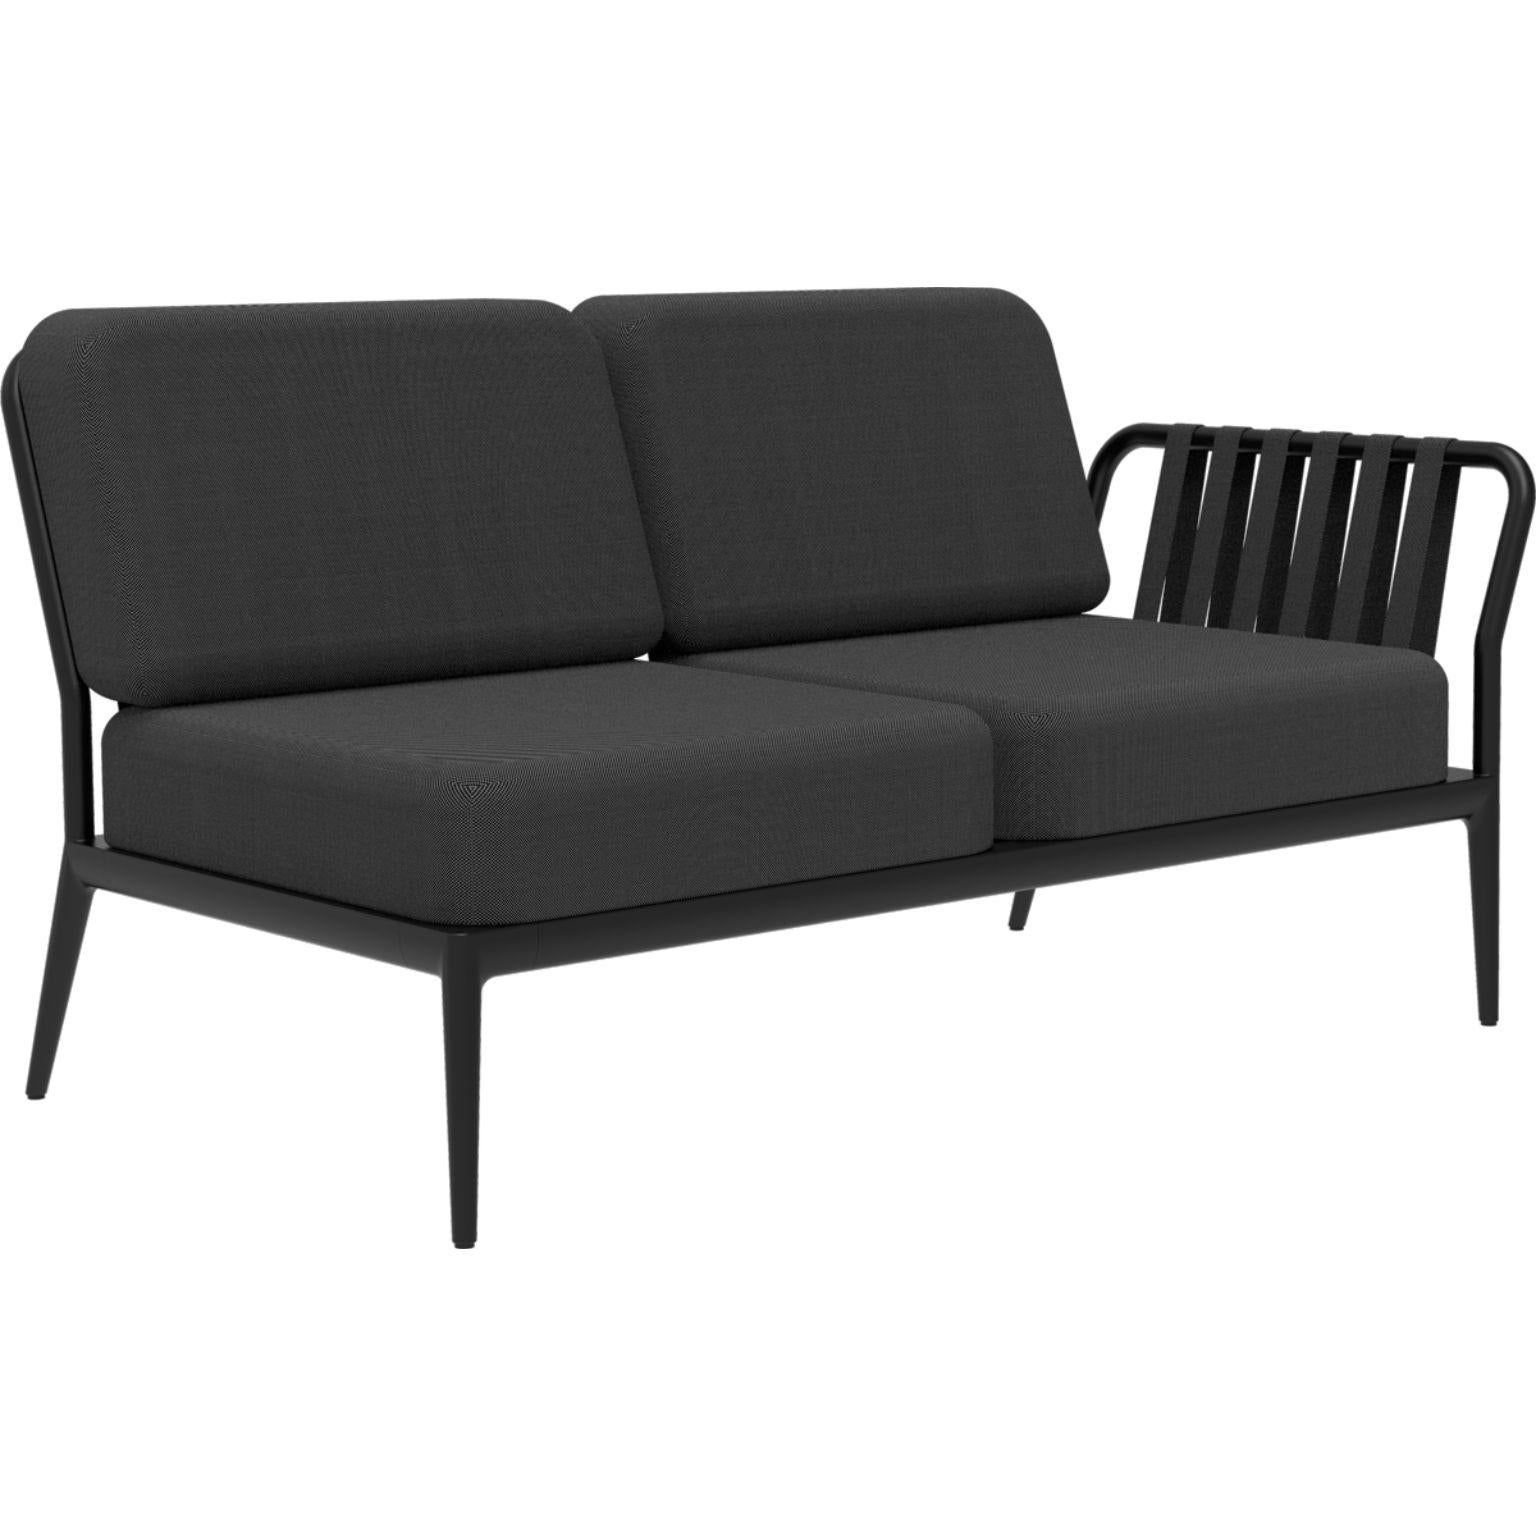 Ribbons black double left modular sofa by MOWEE
Dimensions: D83 x W148 x H81 cm (seat height 42 cm).
Material: Aluminium and upholstery.
Weight: 29 kg
Also available in different colors and finishes. 

An unmistakable collection for its beauty